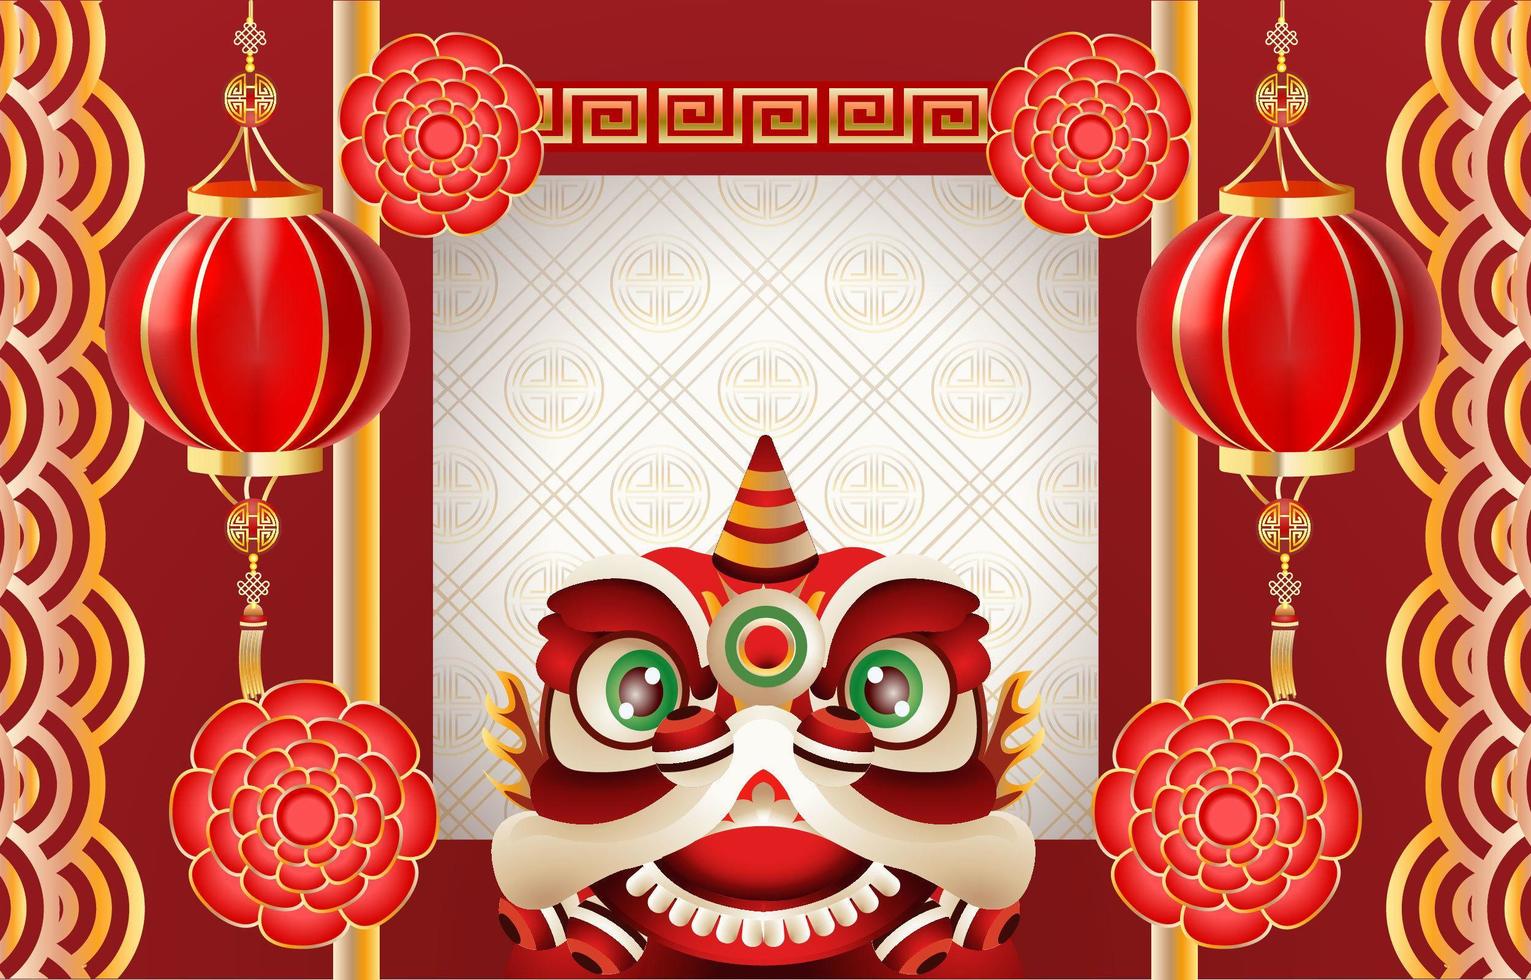 Festivity background Of Chinese New Year vector